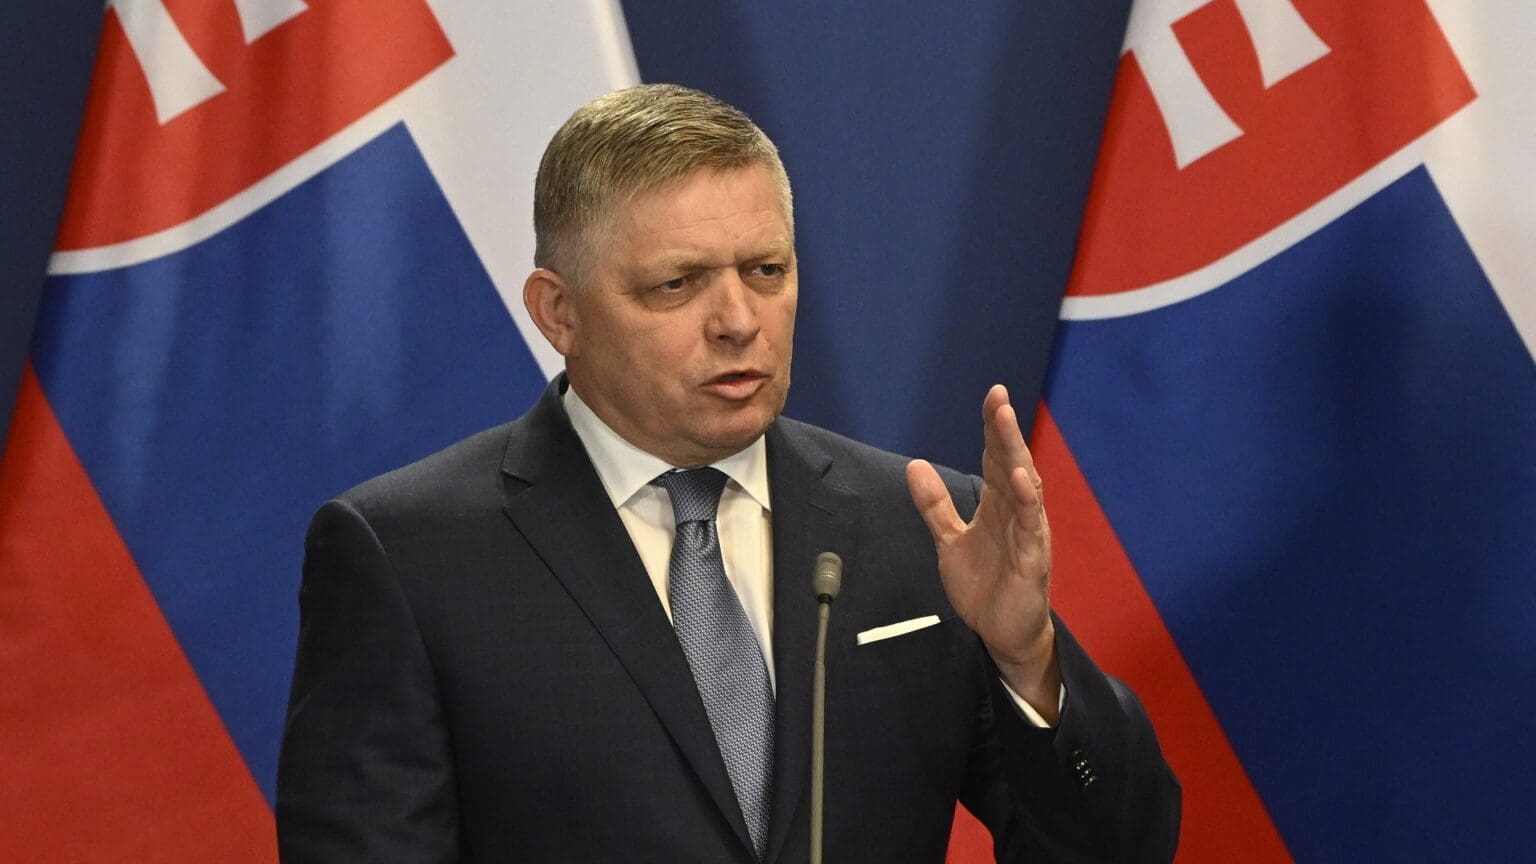 Slovakia Joins Hungary, Poland in Opposition to EU Migration Pact